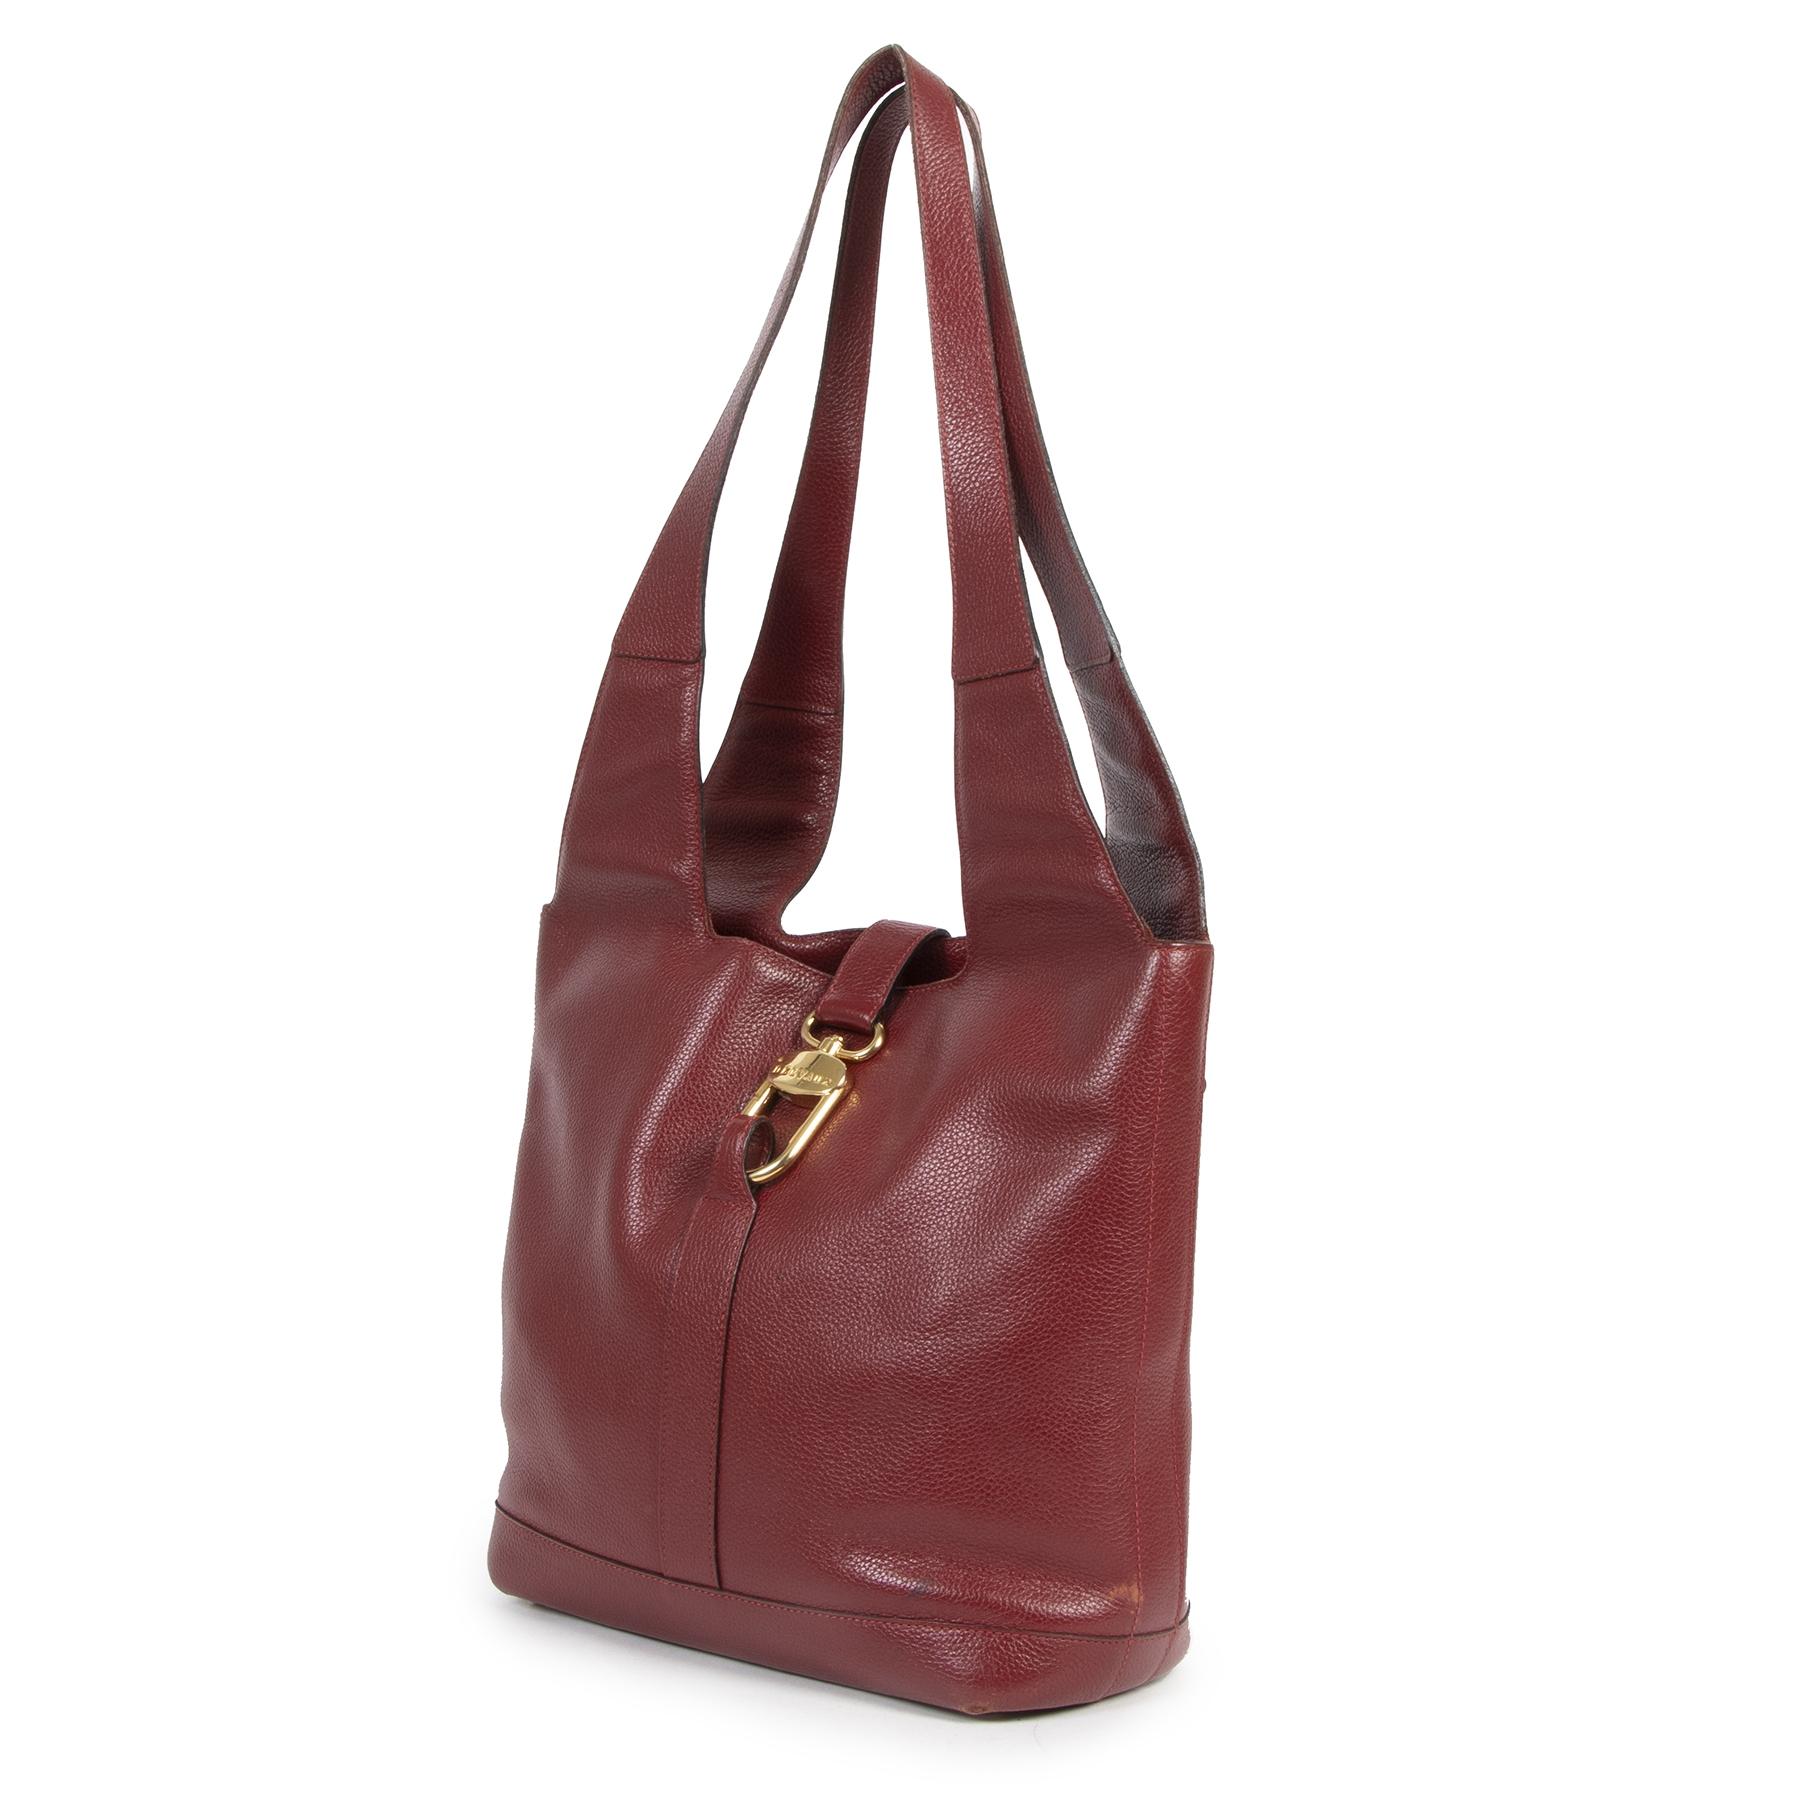 Good preloved condition

Delvaux Red Tote Shoulder Bag

This beautiful Delvaux bag is a practical beauty, perfect for everyday wear. The bag is crafted in gorgeous dark red leather and features a large gold-tone buckle. The long top handles and